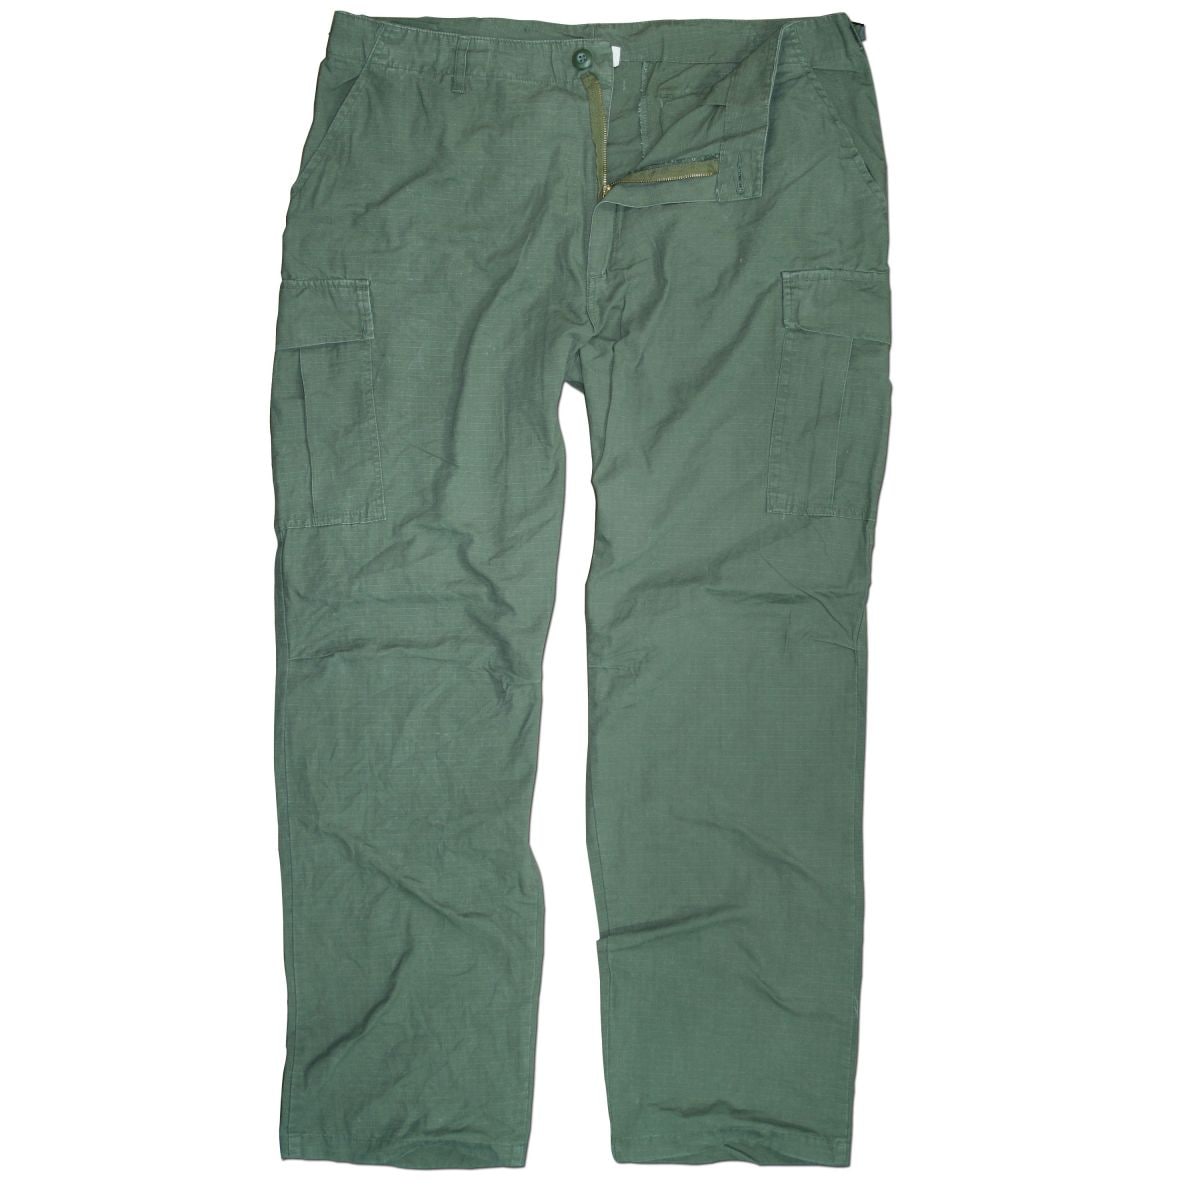 Vietnam Style Field Pants olive green washed | Vietnam Style Field ...